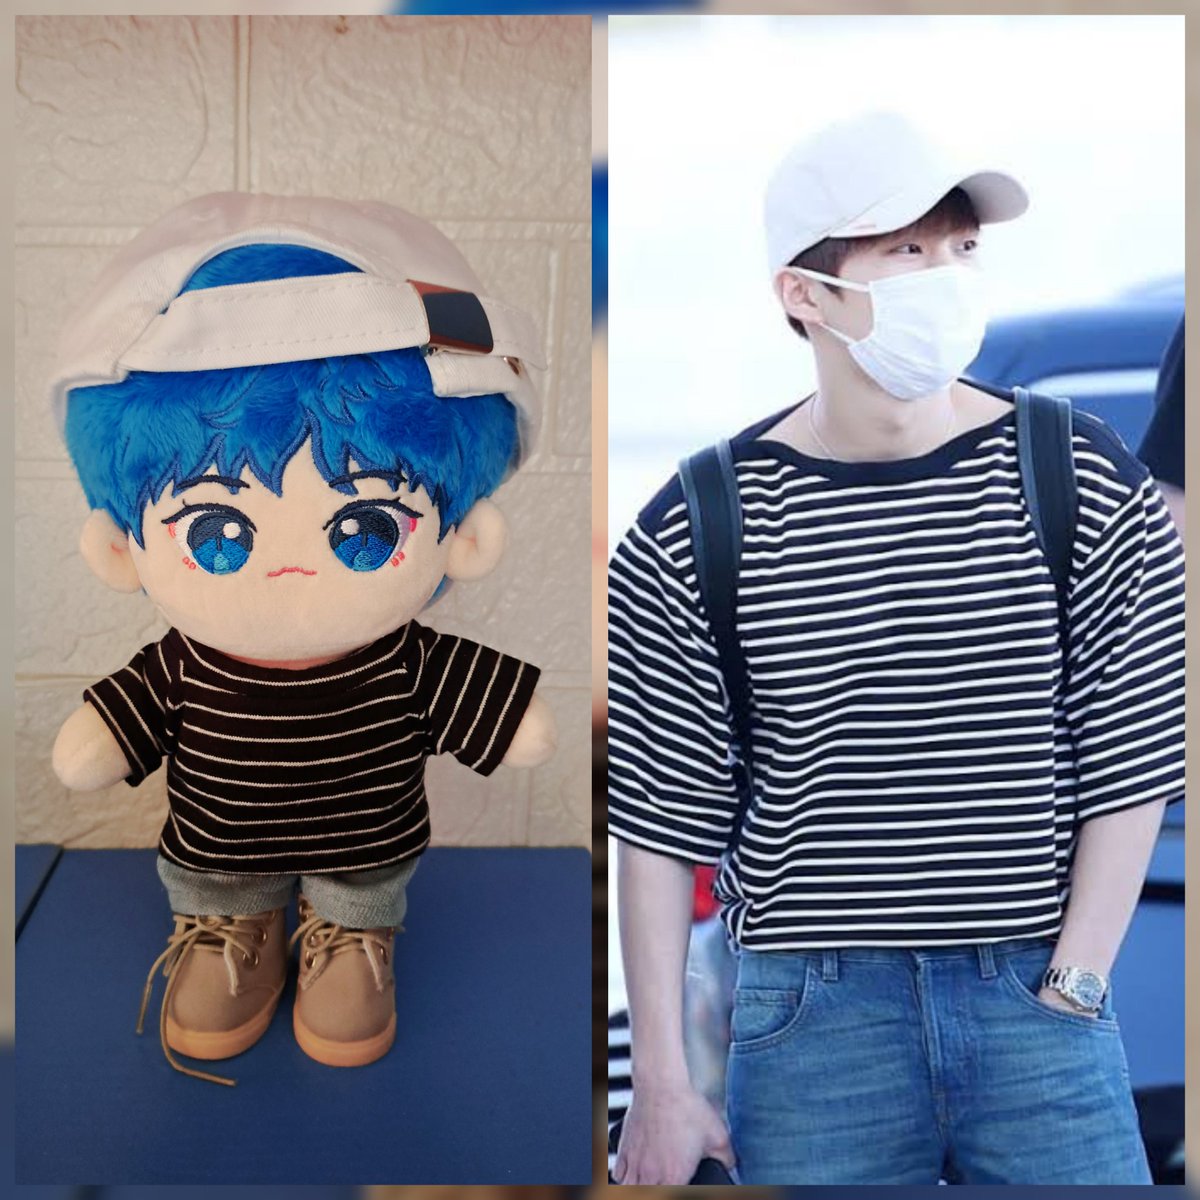 Finally Xiumin's inspired doll 😍😍😍 got the doll from @buonnatale_ thank you so much!!! 💕